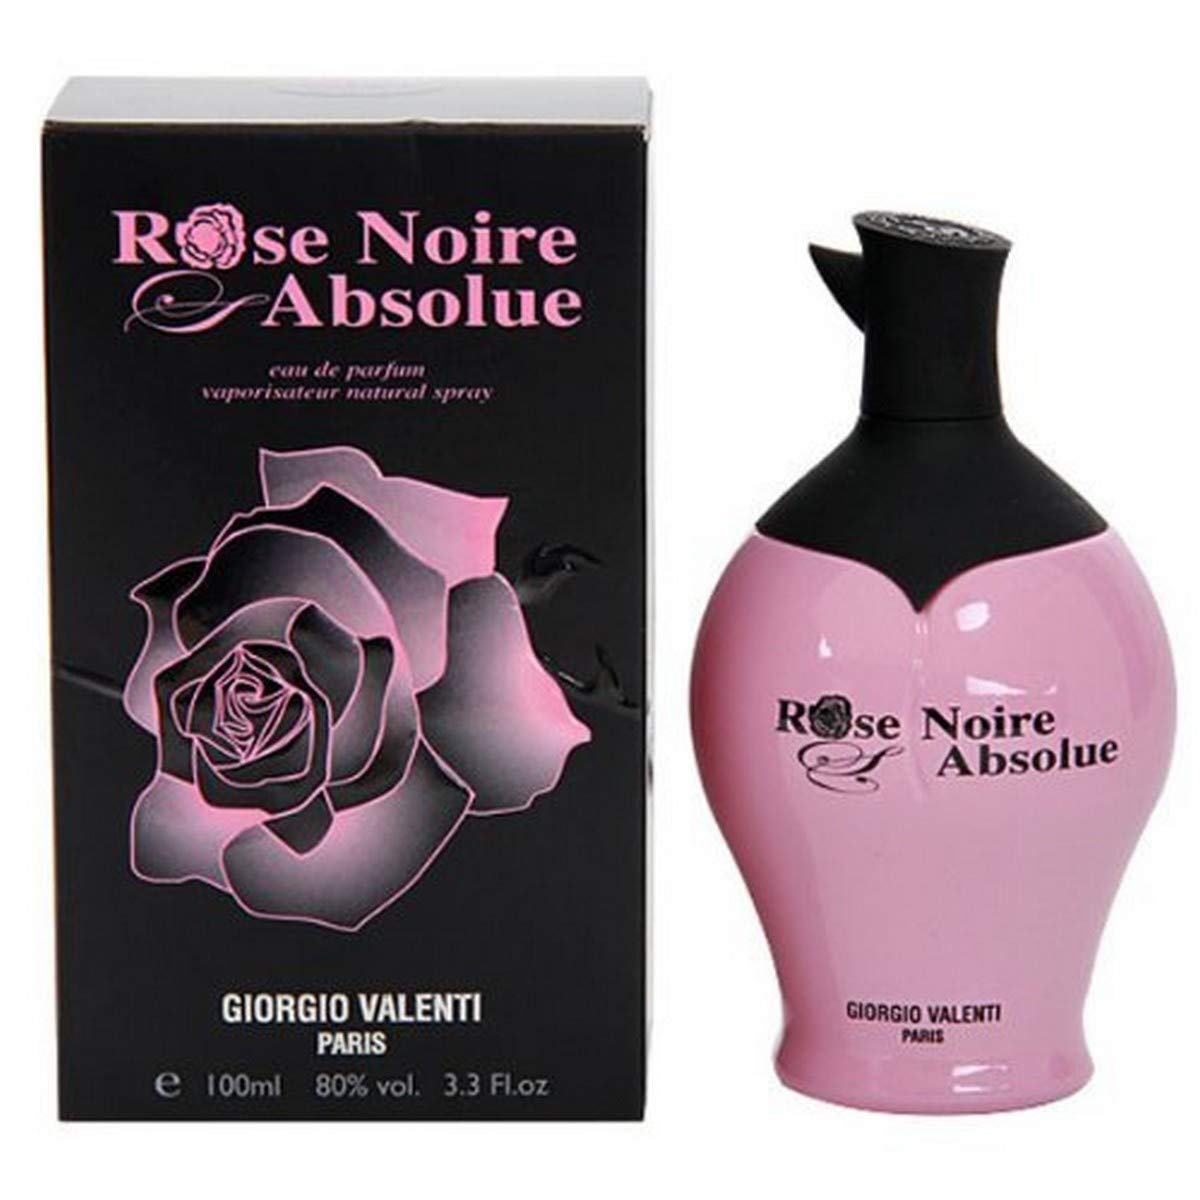 Rose Noir Absolue By Giorgio Valenti - Scent In The City - Perfume & Cologne